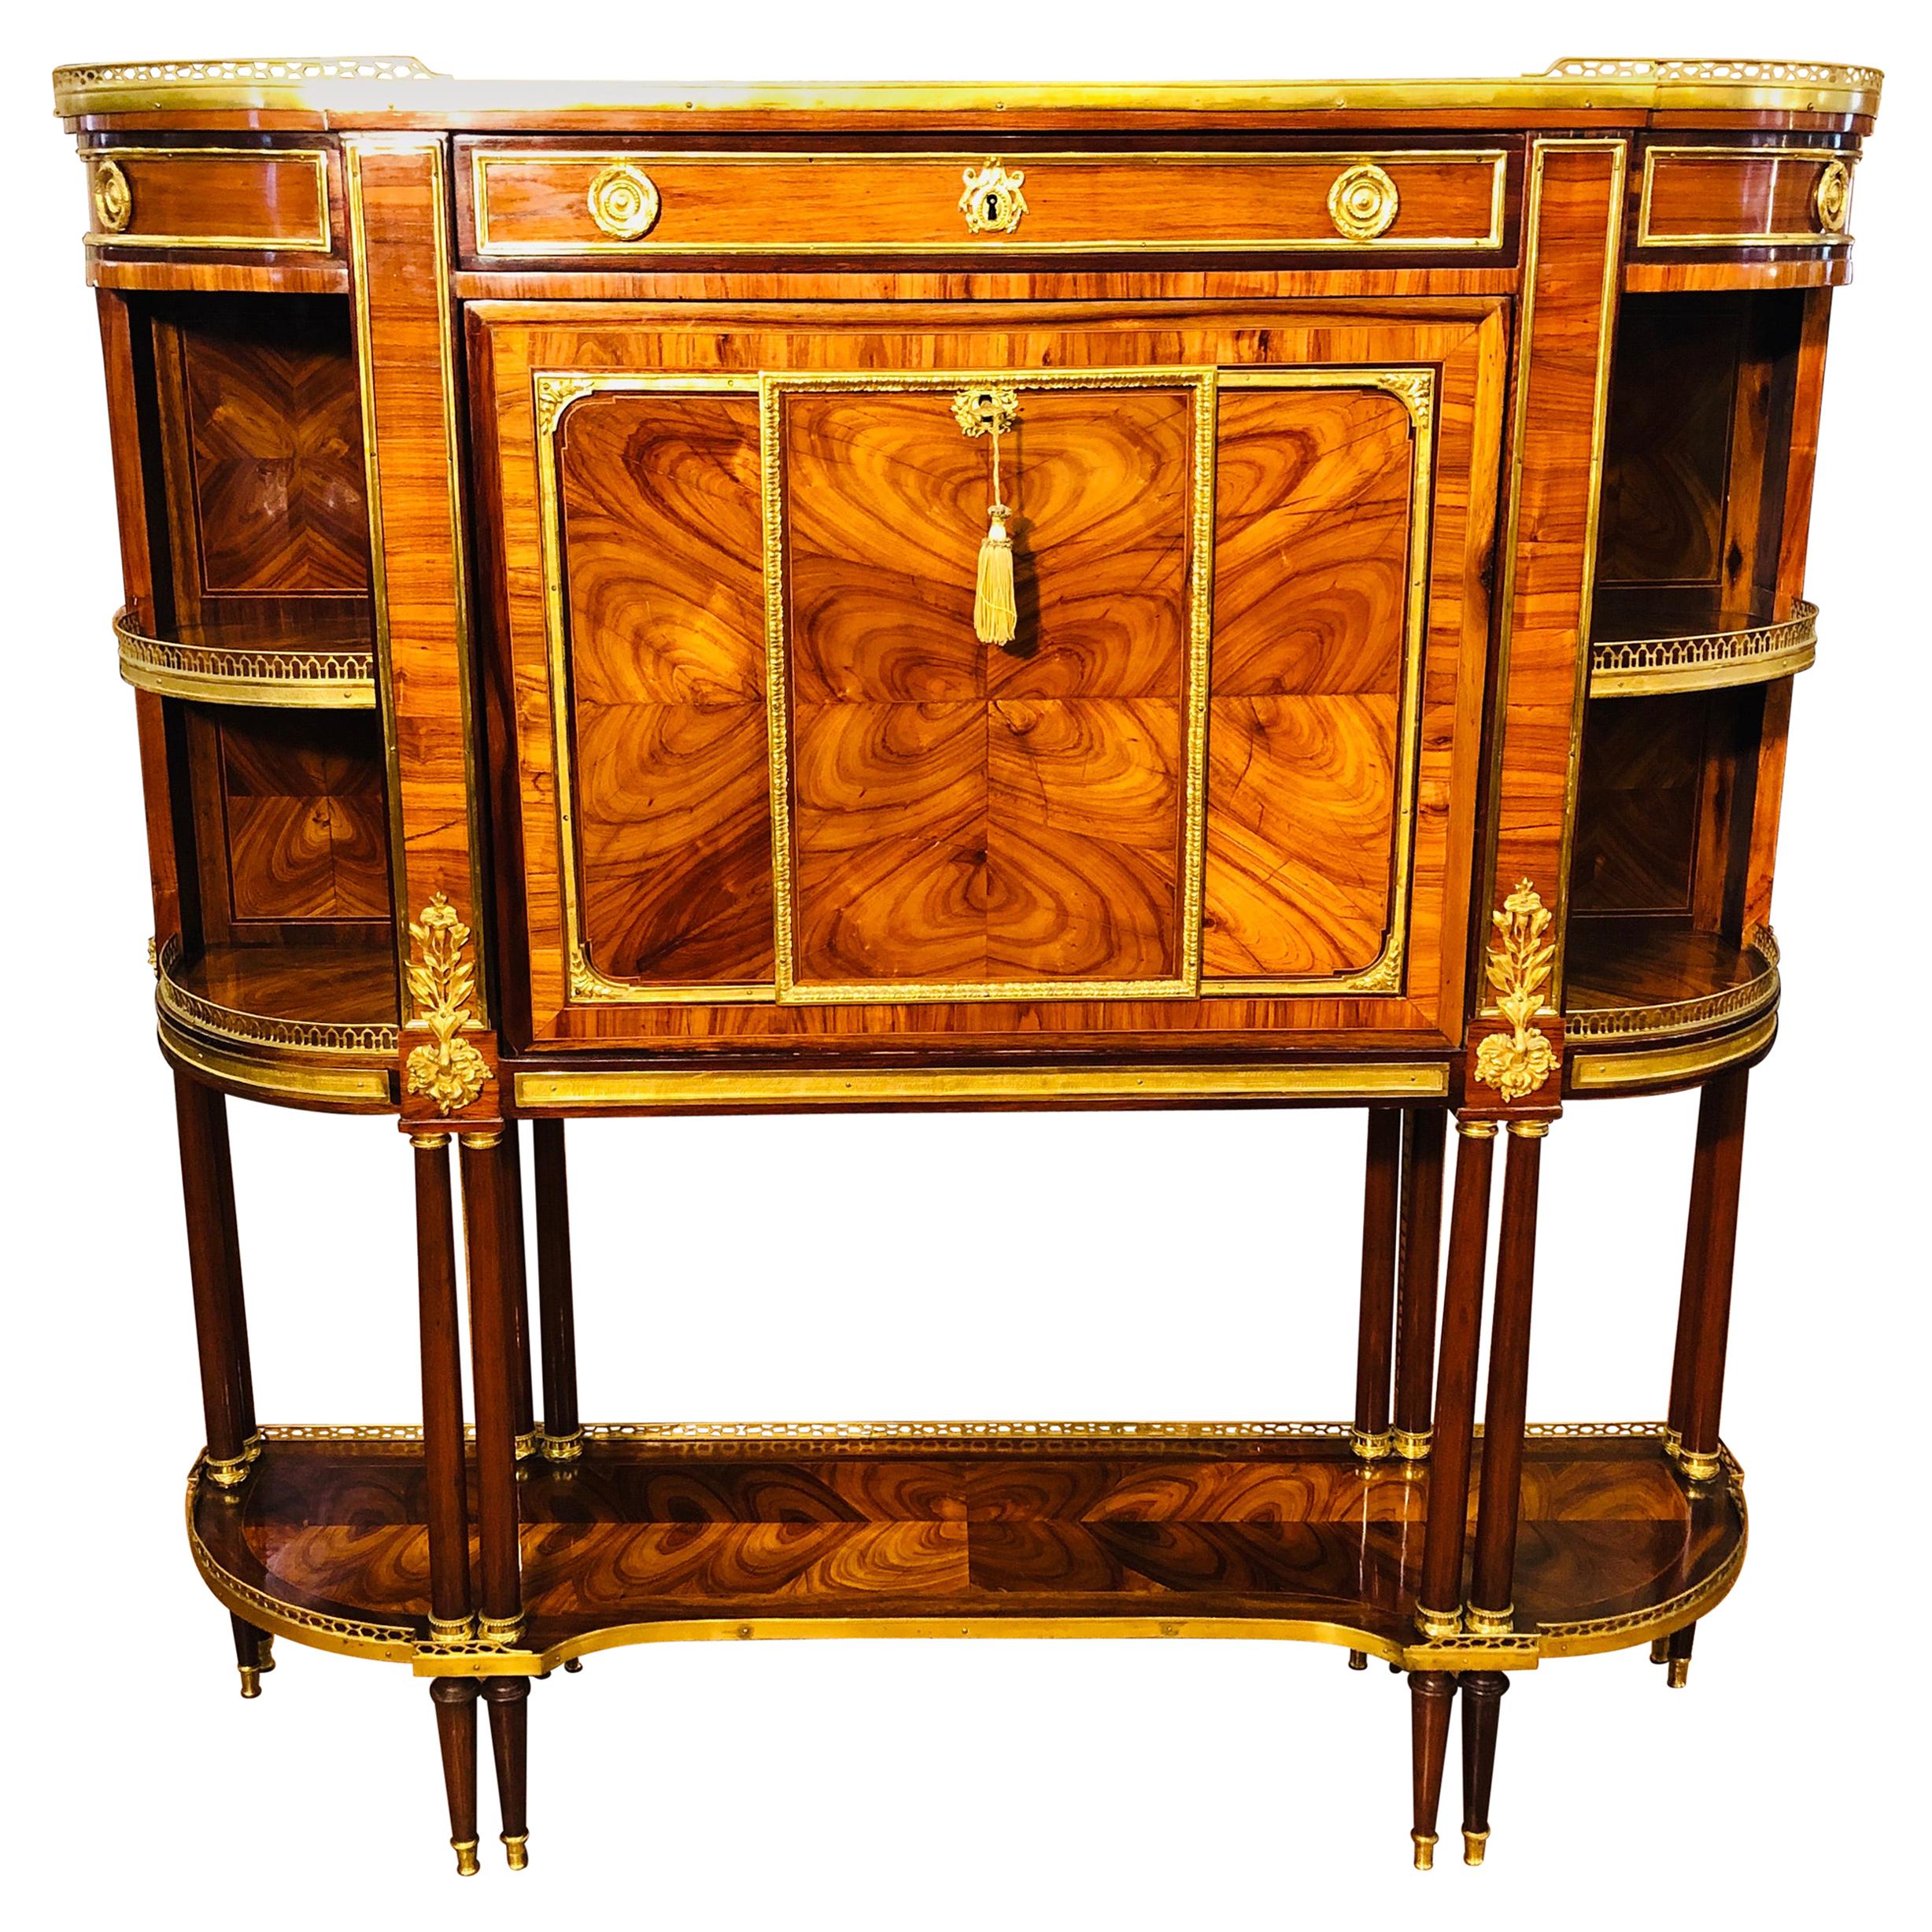 Louis XVI Desks and Writing Tables